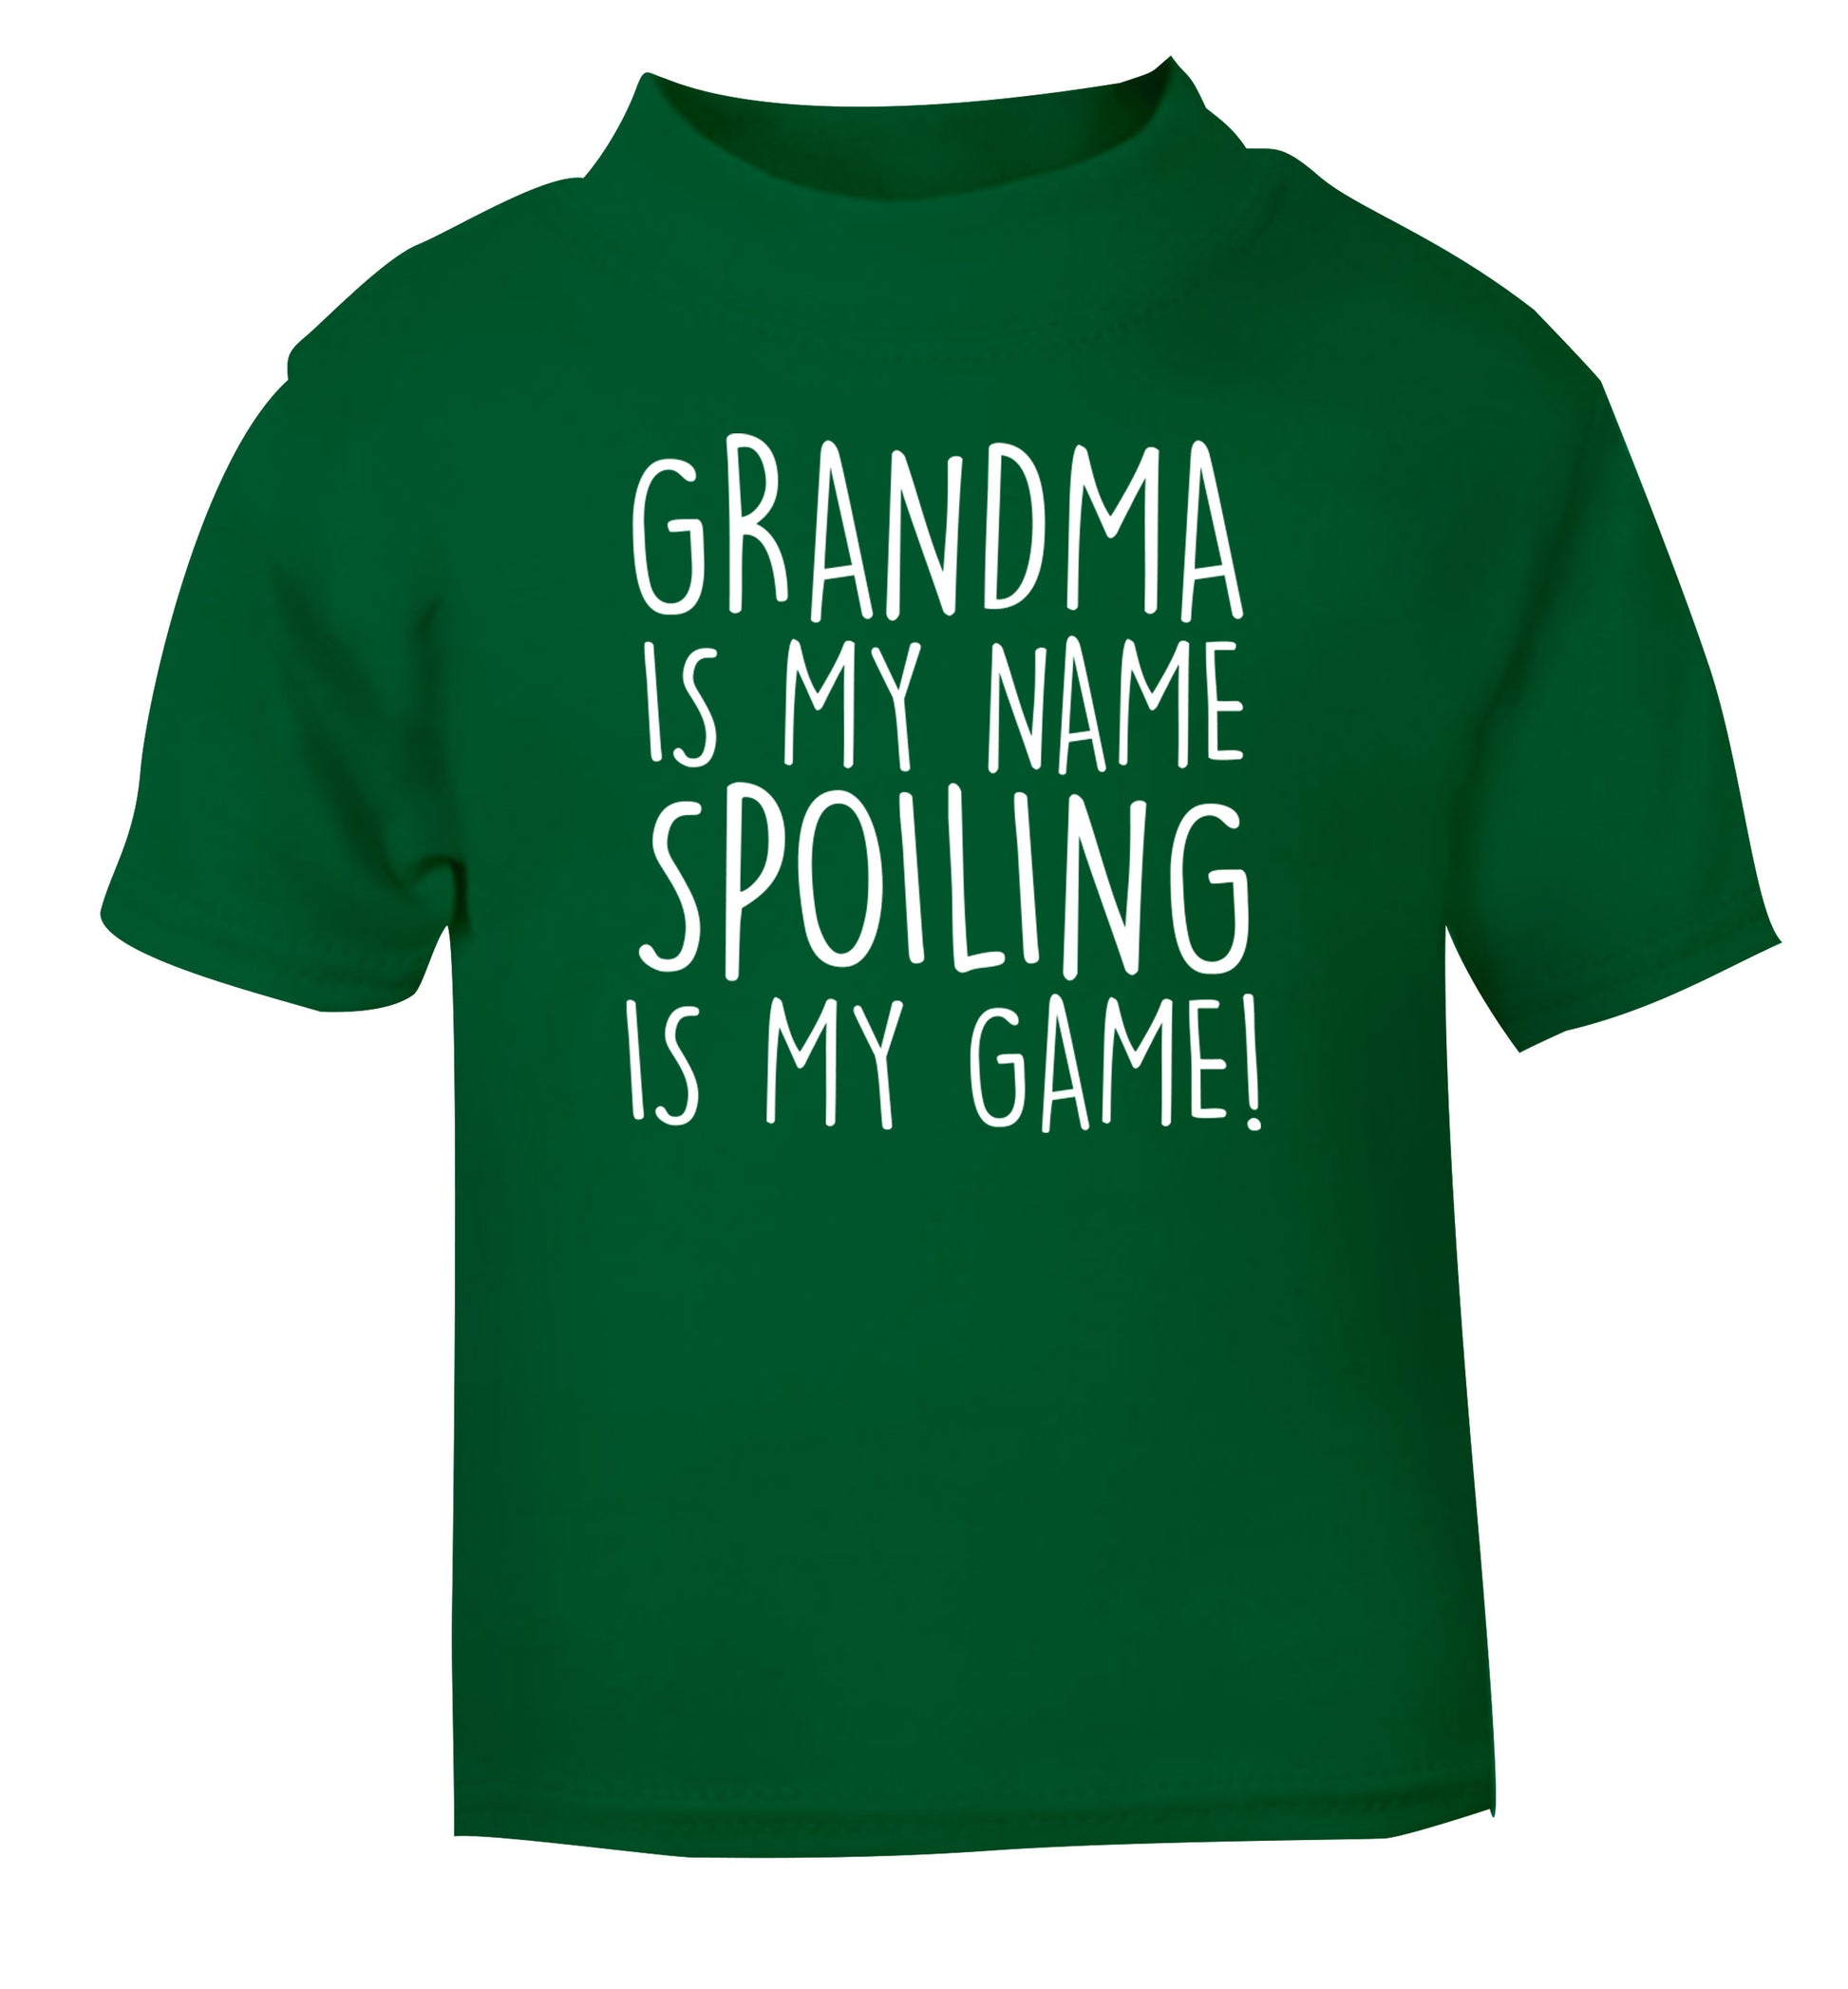 Grandma is my name, spoiling is my game green Baby Toddler Tshirt 2 Years